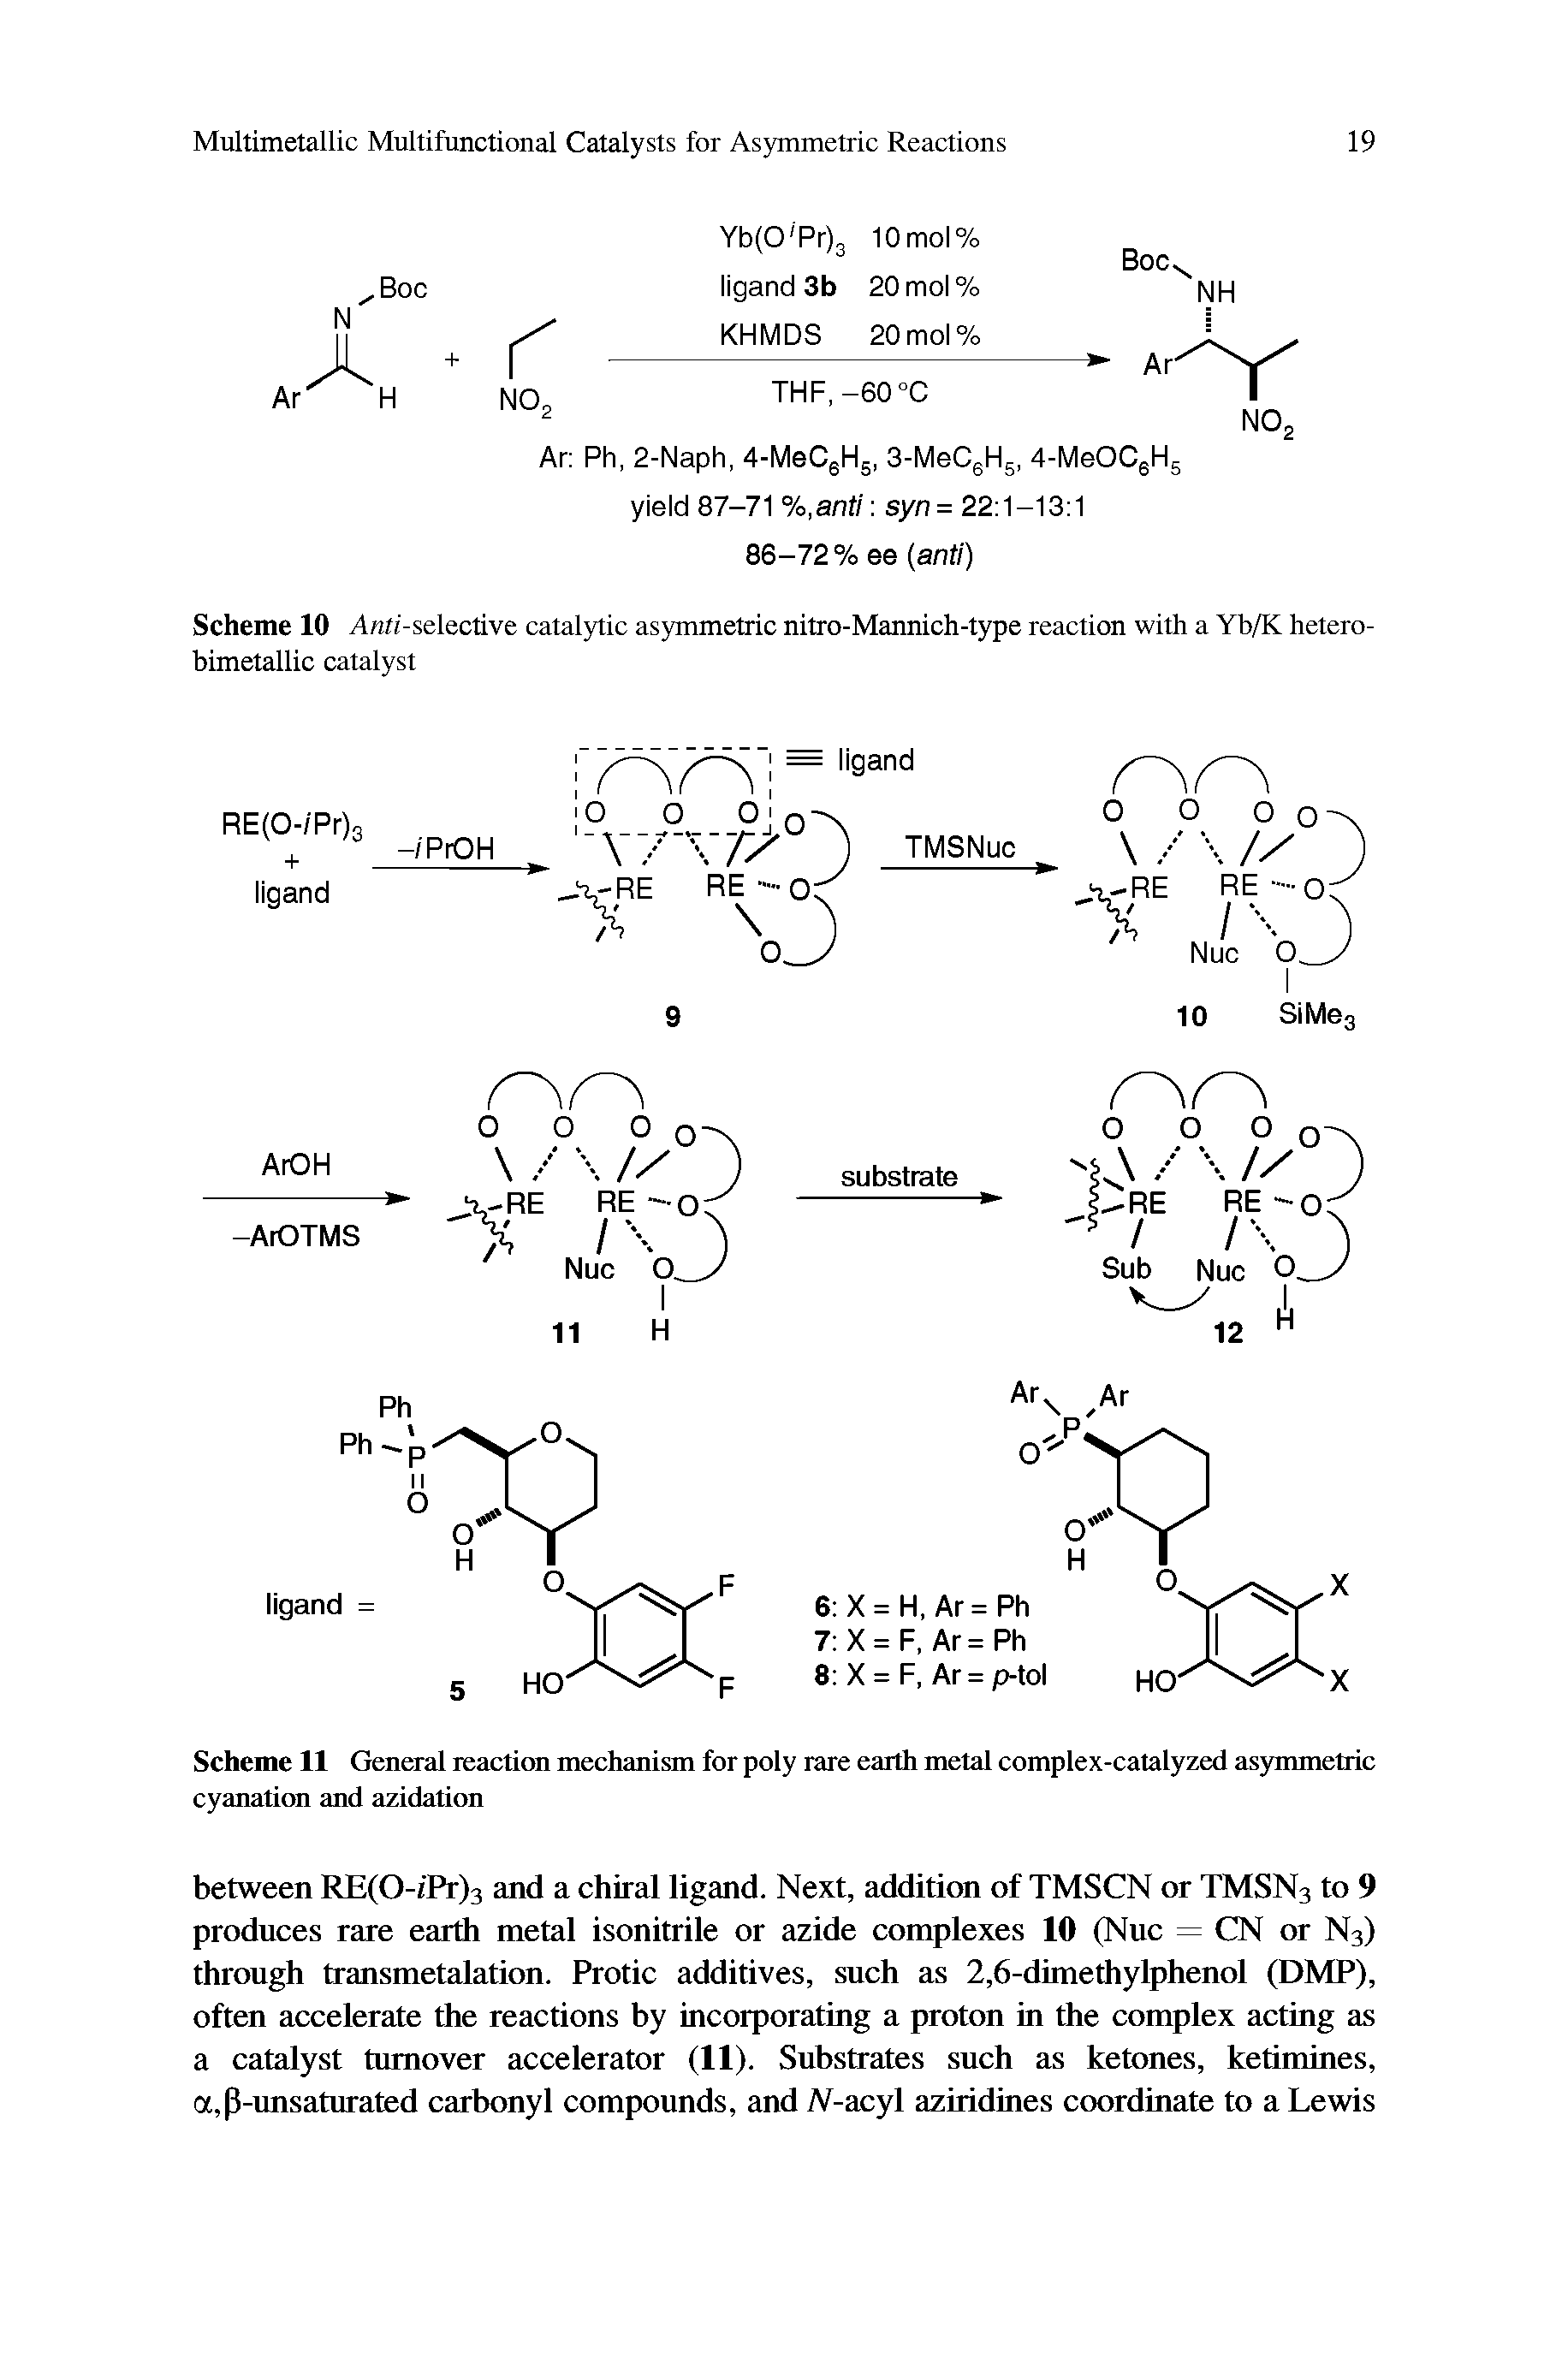 Scheme 11 General reaction mechanism for poly rare earth metal complex-catalyzed asymmetric cyanation and azidation...